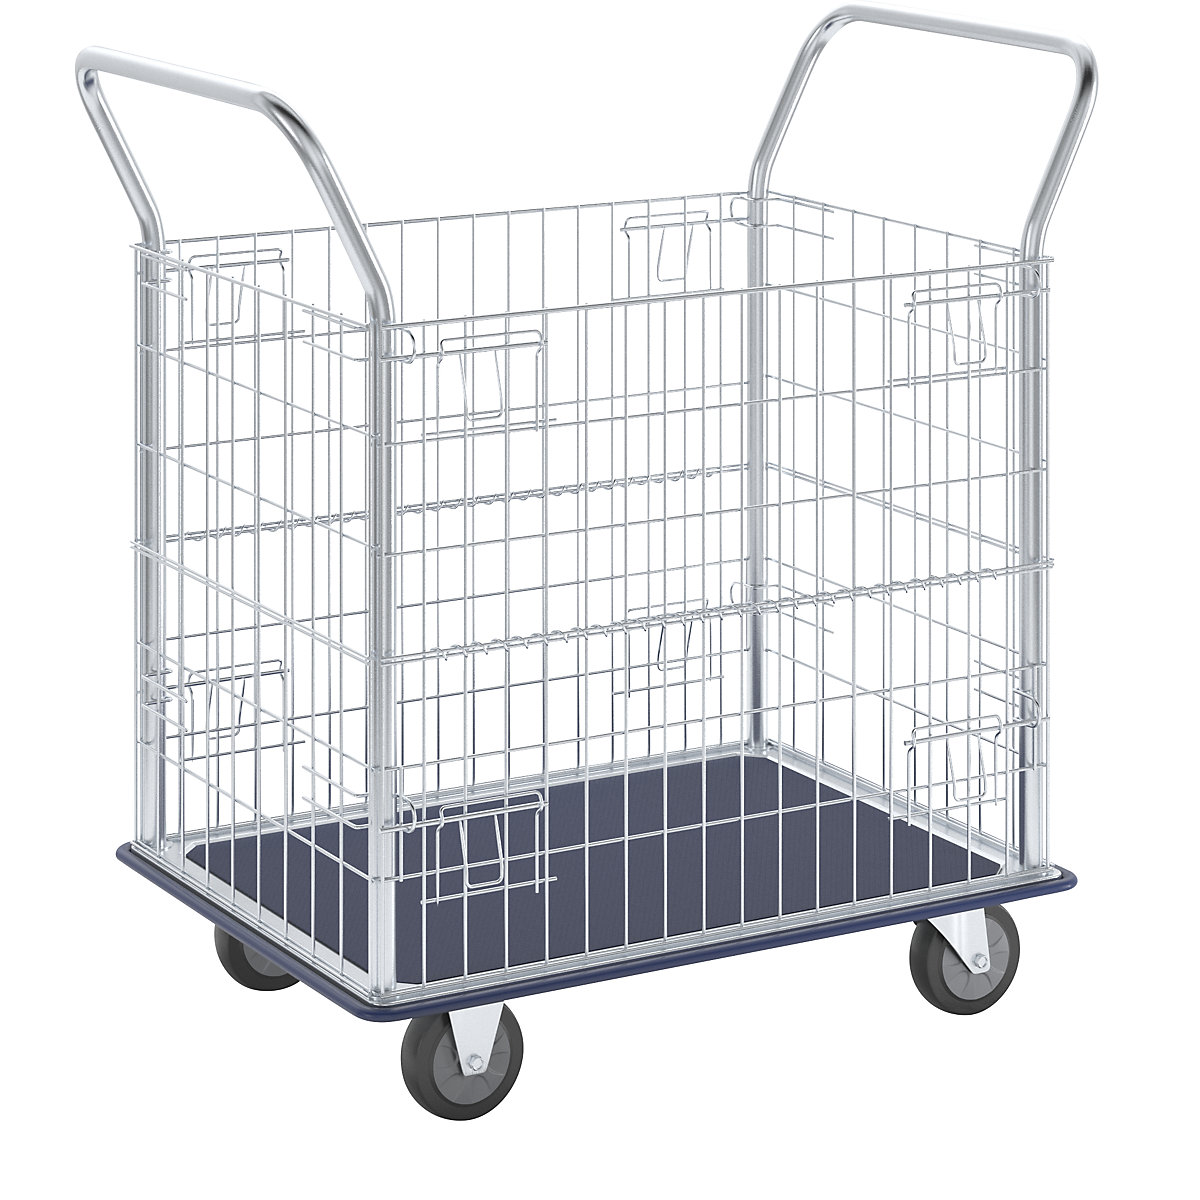 Mesh trolley, zinc plated mesh sides, with stainless steel push handles, max. load 370 kg-2